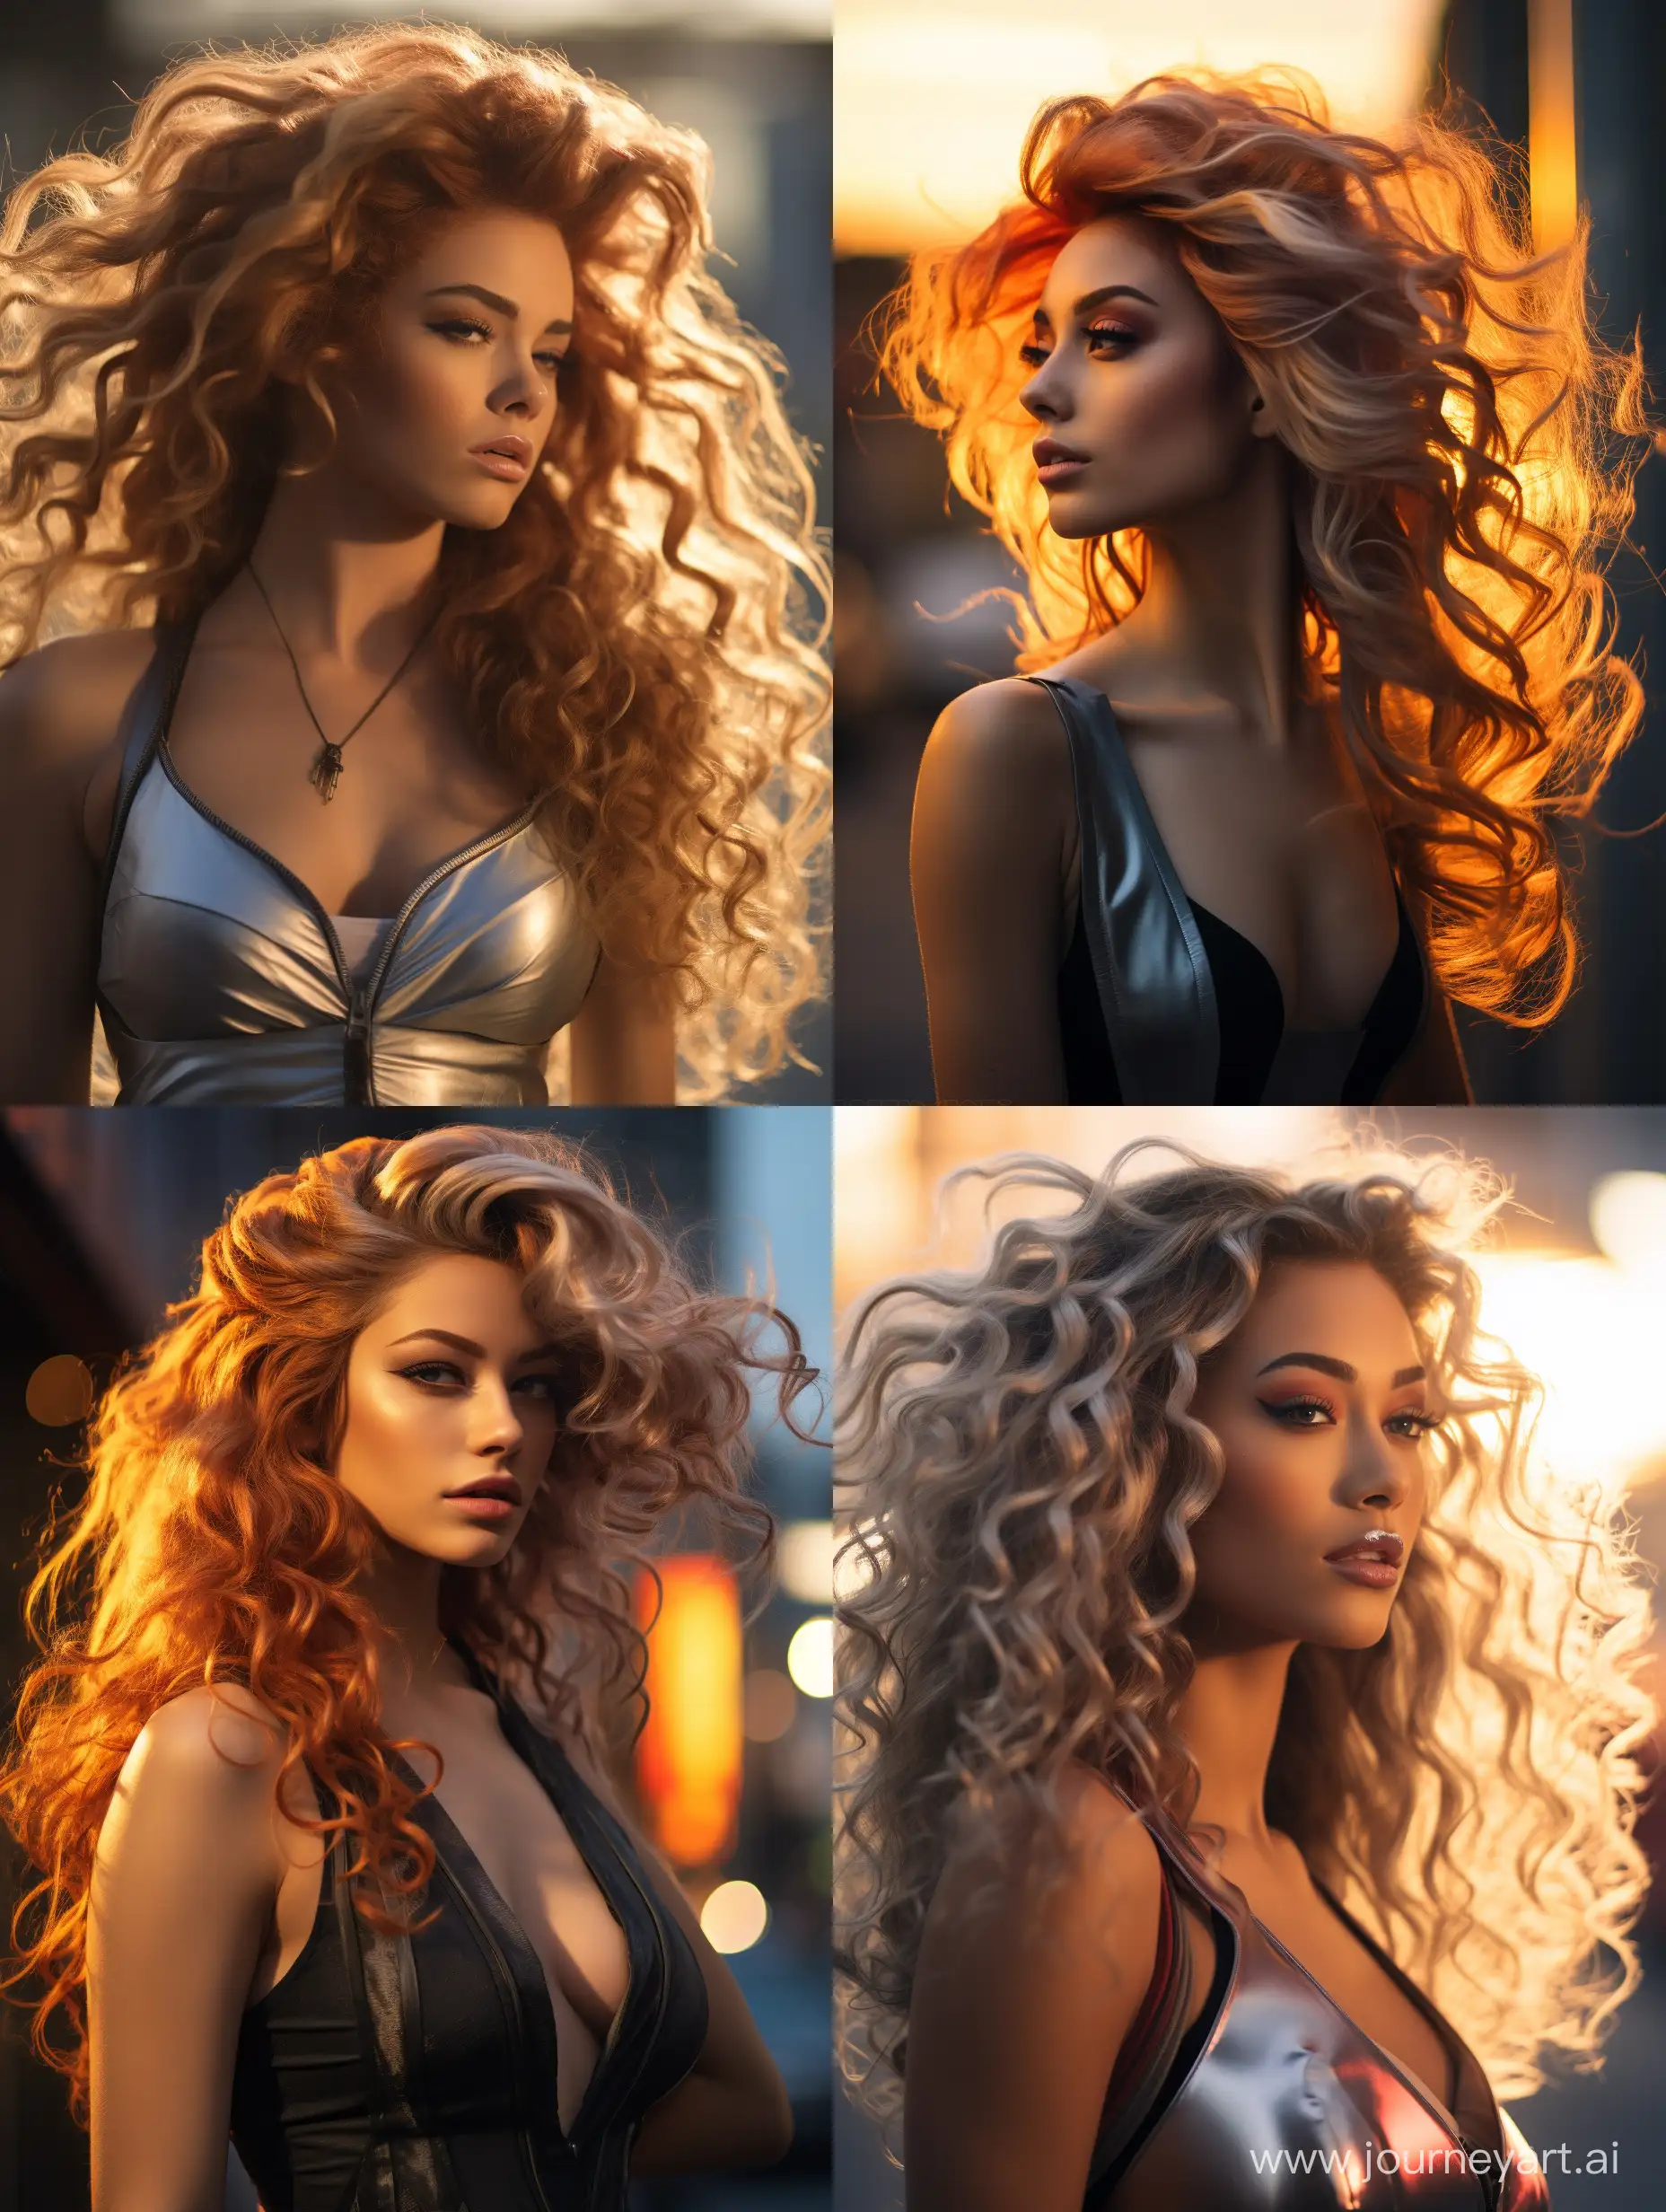 A beautiful Cyberpunk Woman with long gold curl hair, Canon EOS 5D Mark IV, 940mm, ISO 100, Shutter Speed 1/1000, Aperture f/1.8 with the Sun in background